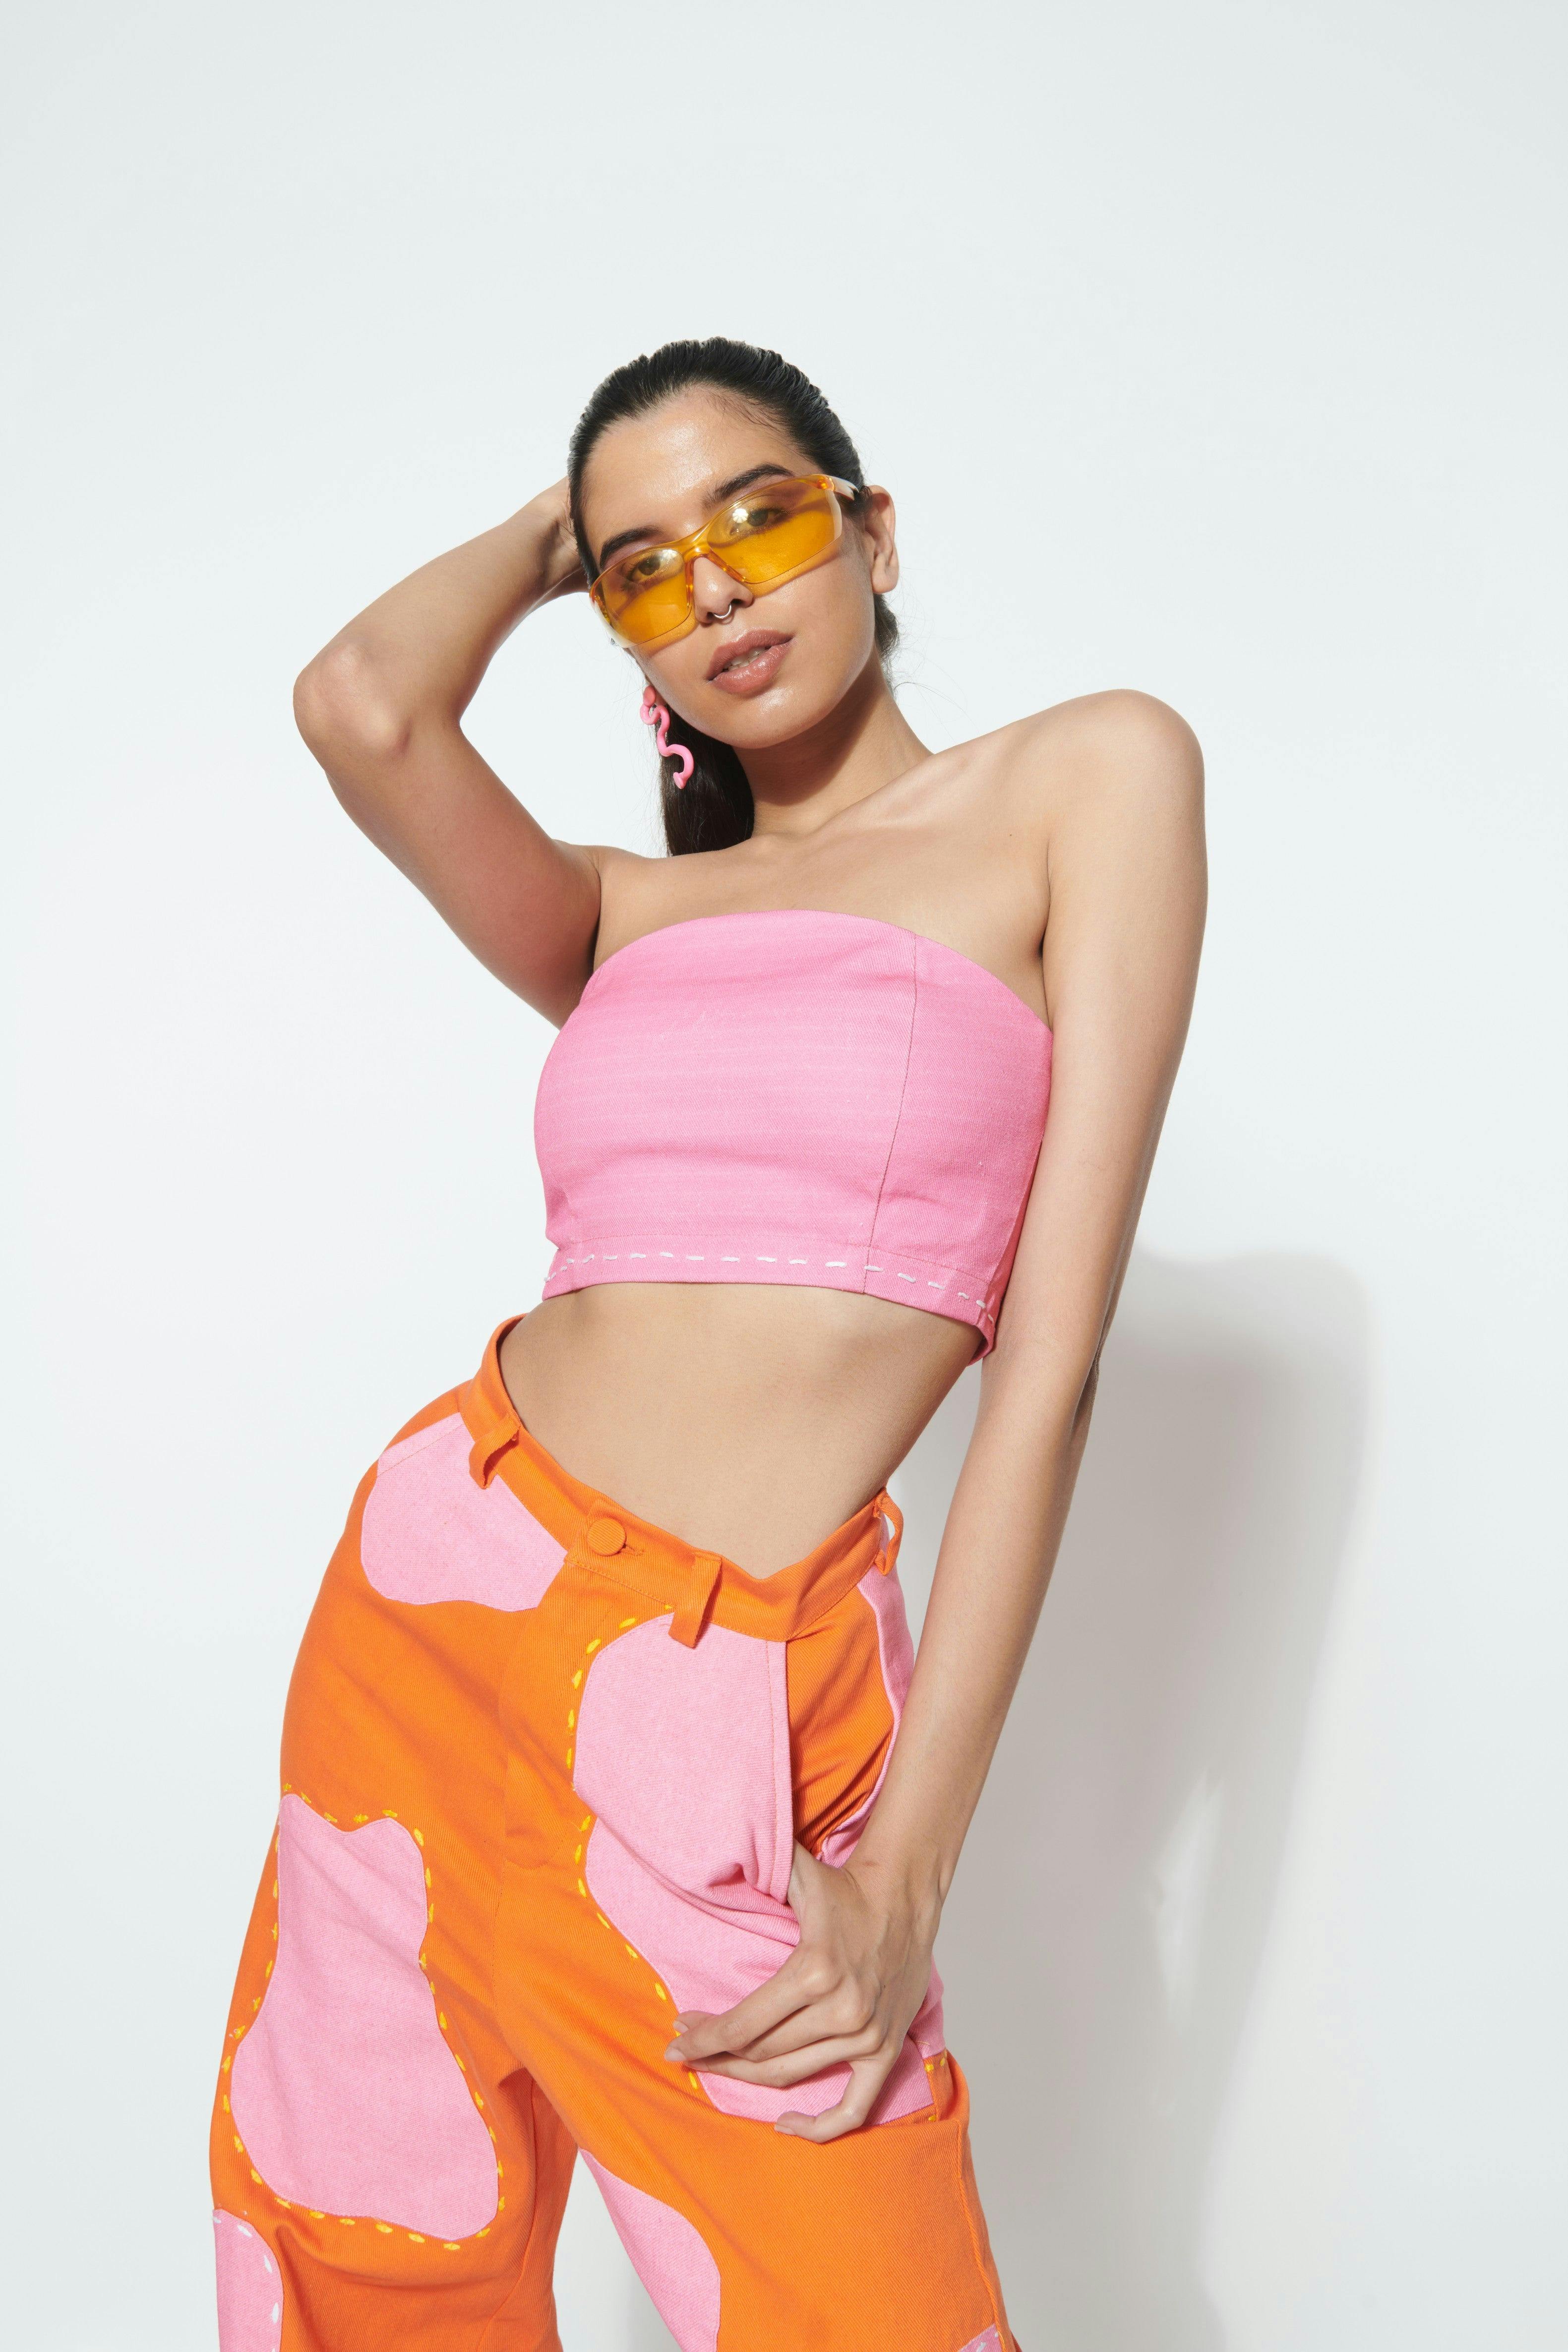 COTTON CANDY TUBE TOP - PART OF A SET, a product by Sazo